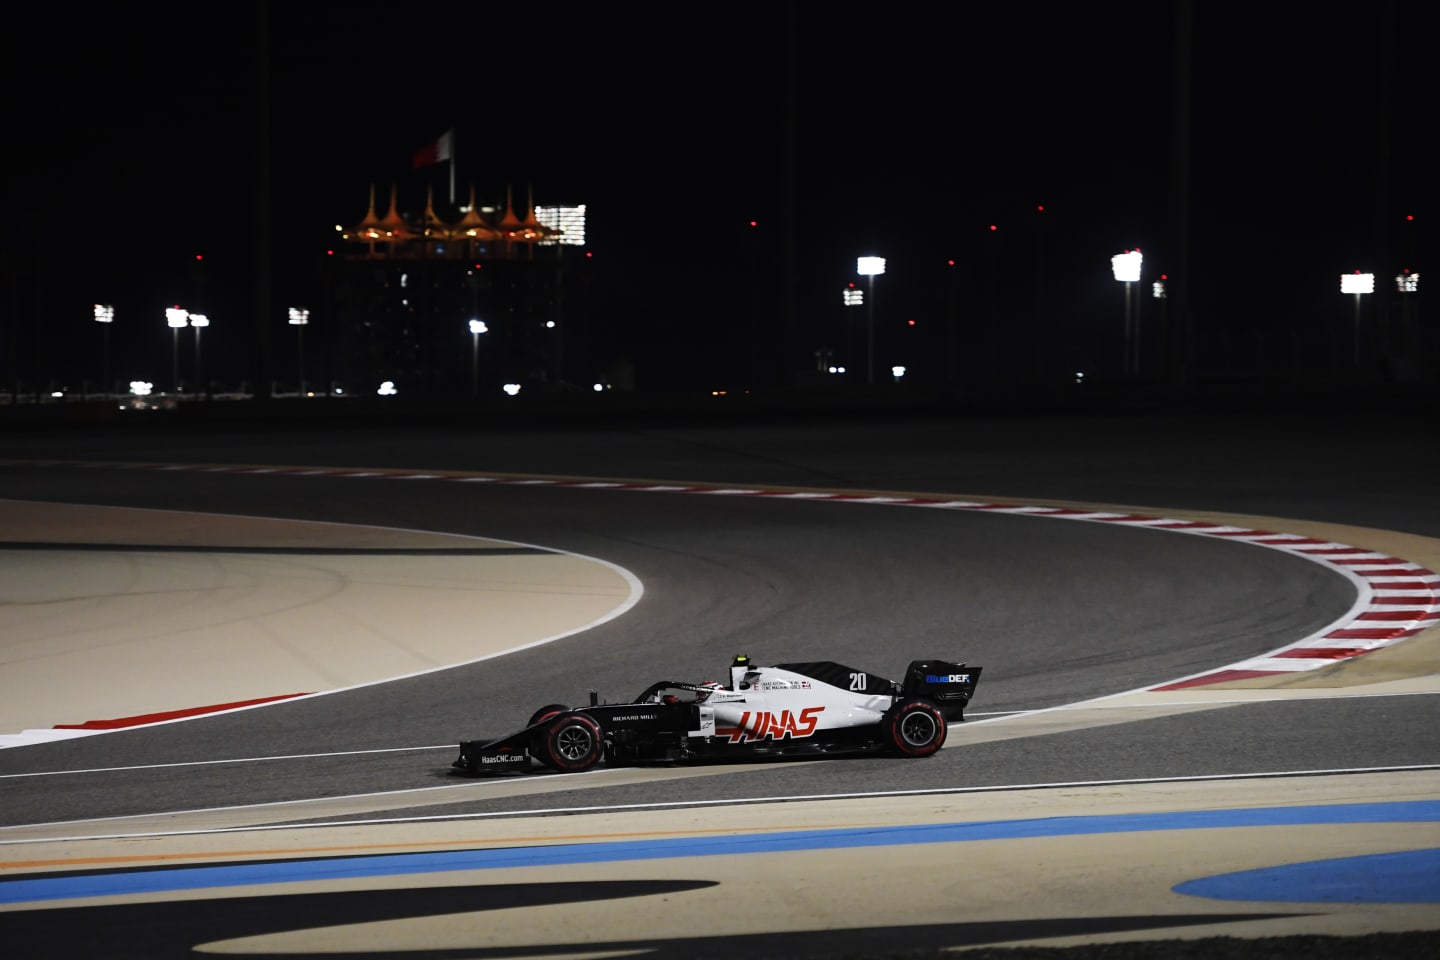 BAHRAIN, BAHRAIN - DECEMBER 04: Kevin Magnussen of Denmark driving the (20) Haas F1 Team VF-20 Ferrari on track during practice ahead of the F1 Grand Prix of Sakhir at Bahrain International Circuit on December 04, 2020 in Bahrain, Bahrain. (Photo by Rudy Carezzevoli/Getty Images)